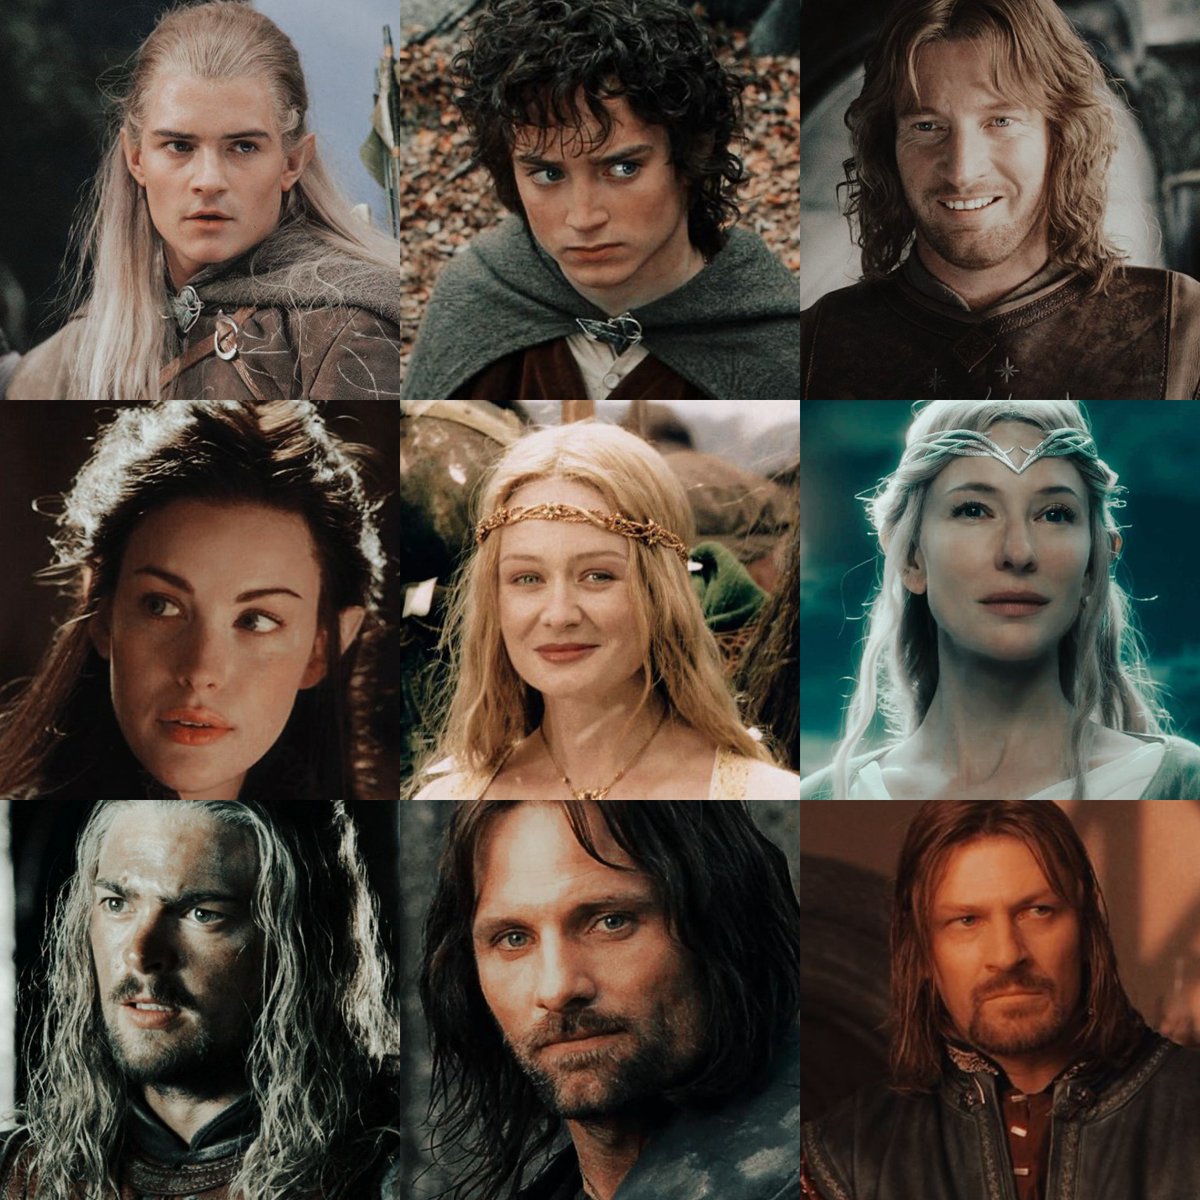  Thread of the results for the 'Hottest LOTR character' poll 